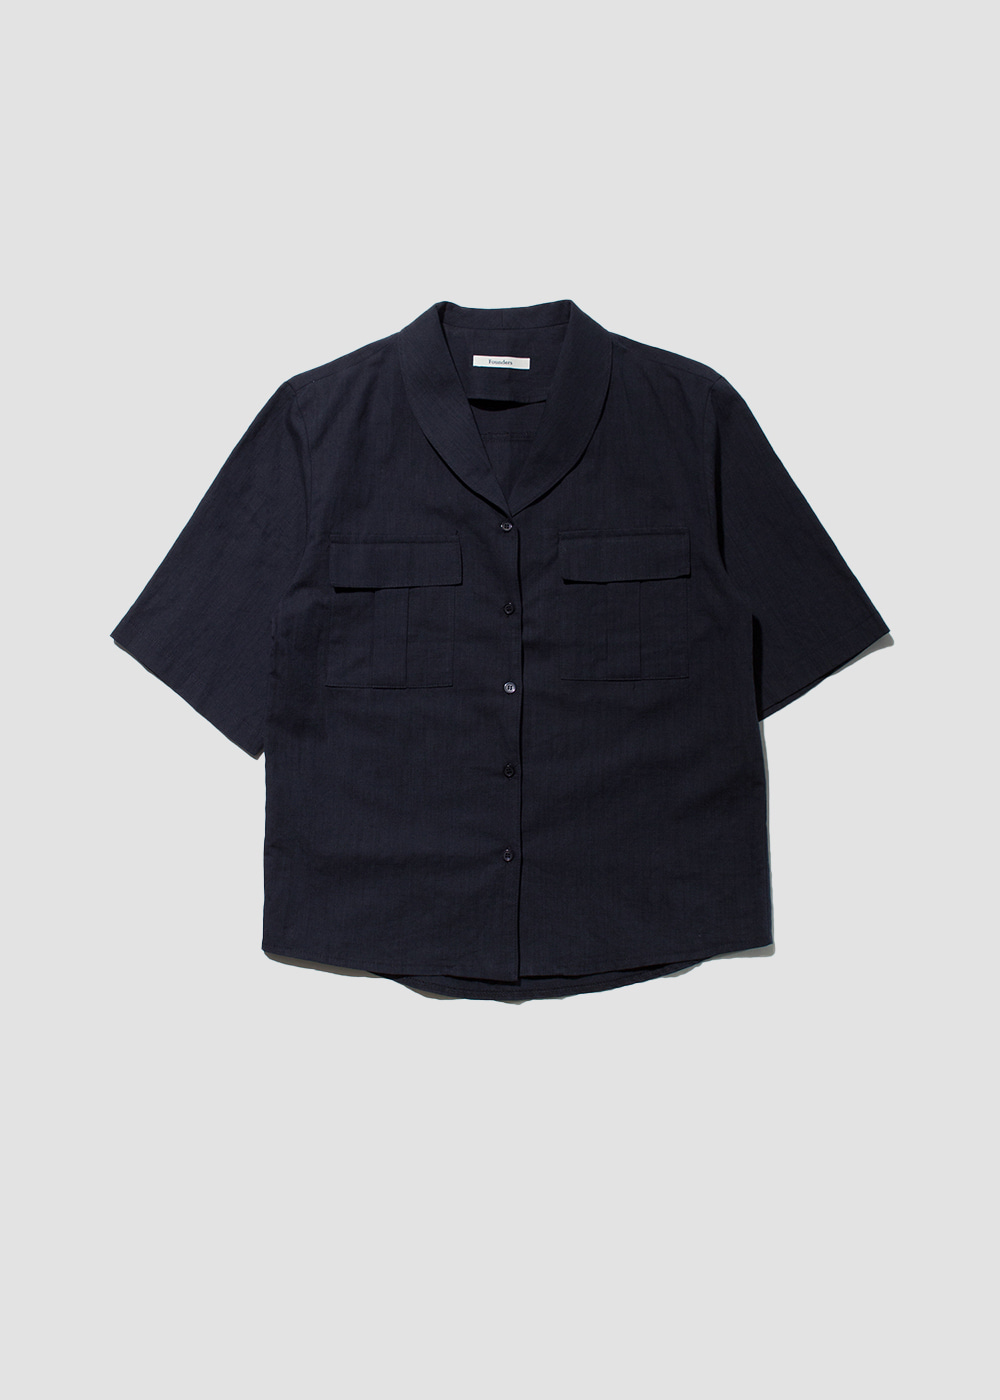 [FOUNDERS] Moby linen shirt